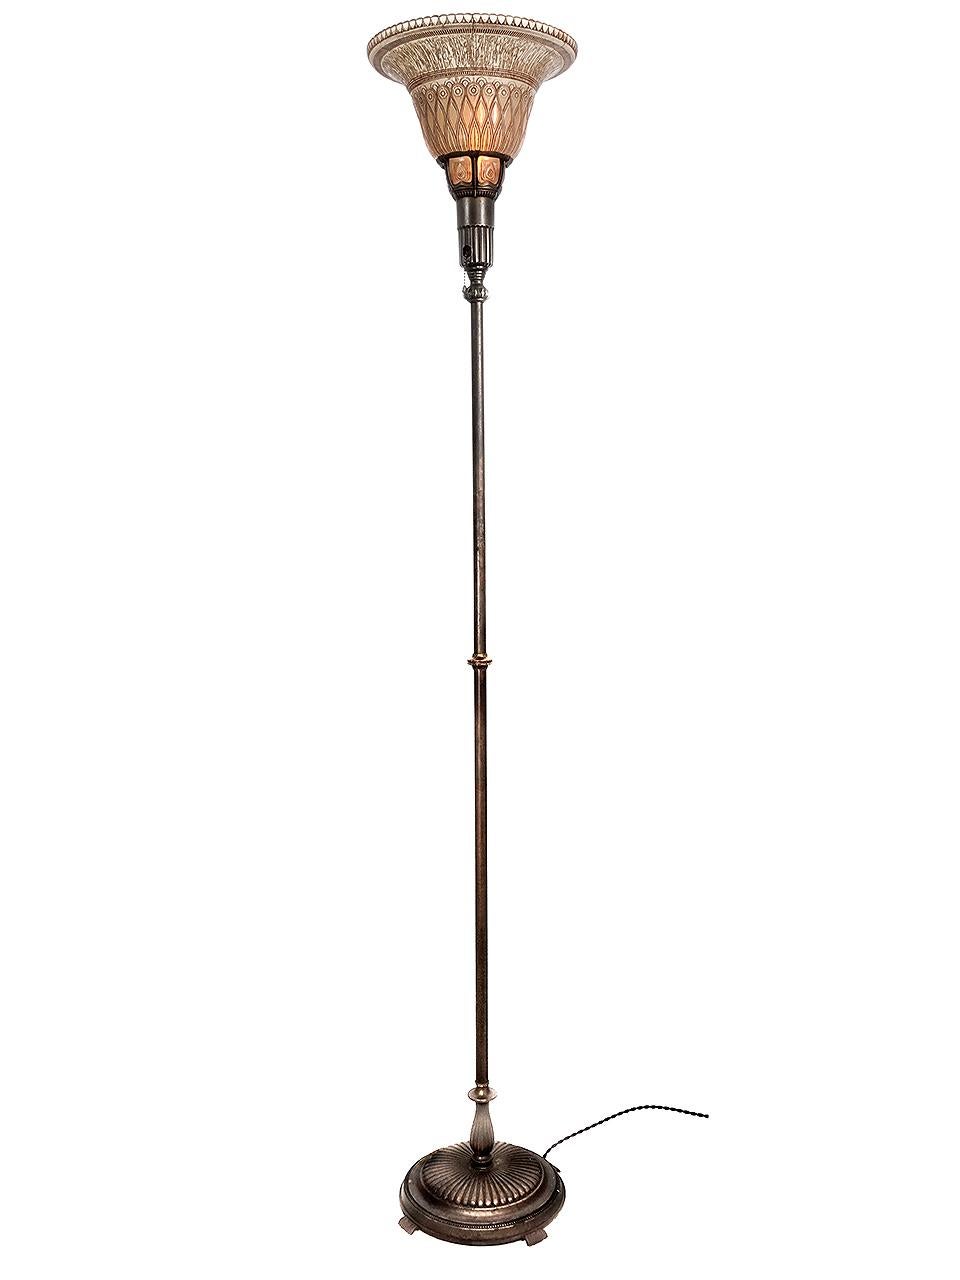 This is a rich looking and beautifully detailed Torchiere floor lamp. The glass has an etched deco floral pattern with an amber wash. The finishes are all original and show a bit of age. There is a small discolored hard to see spot on a top edge of